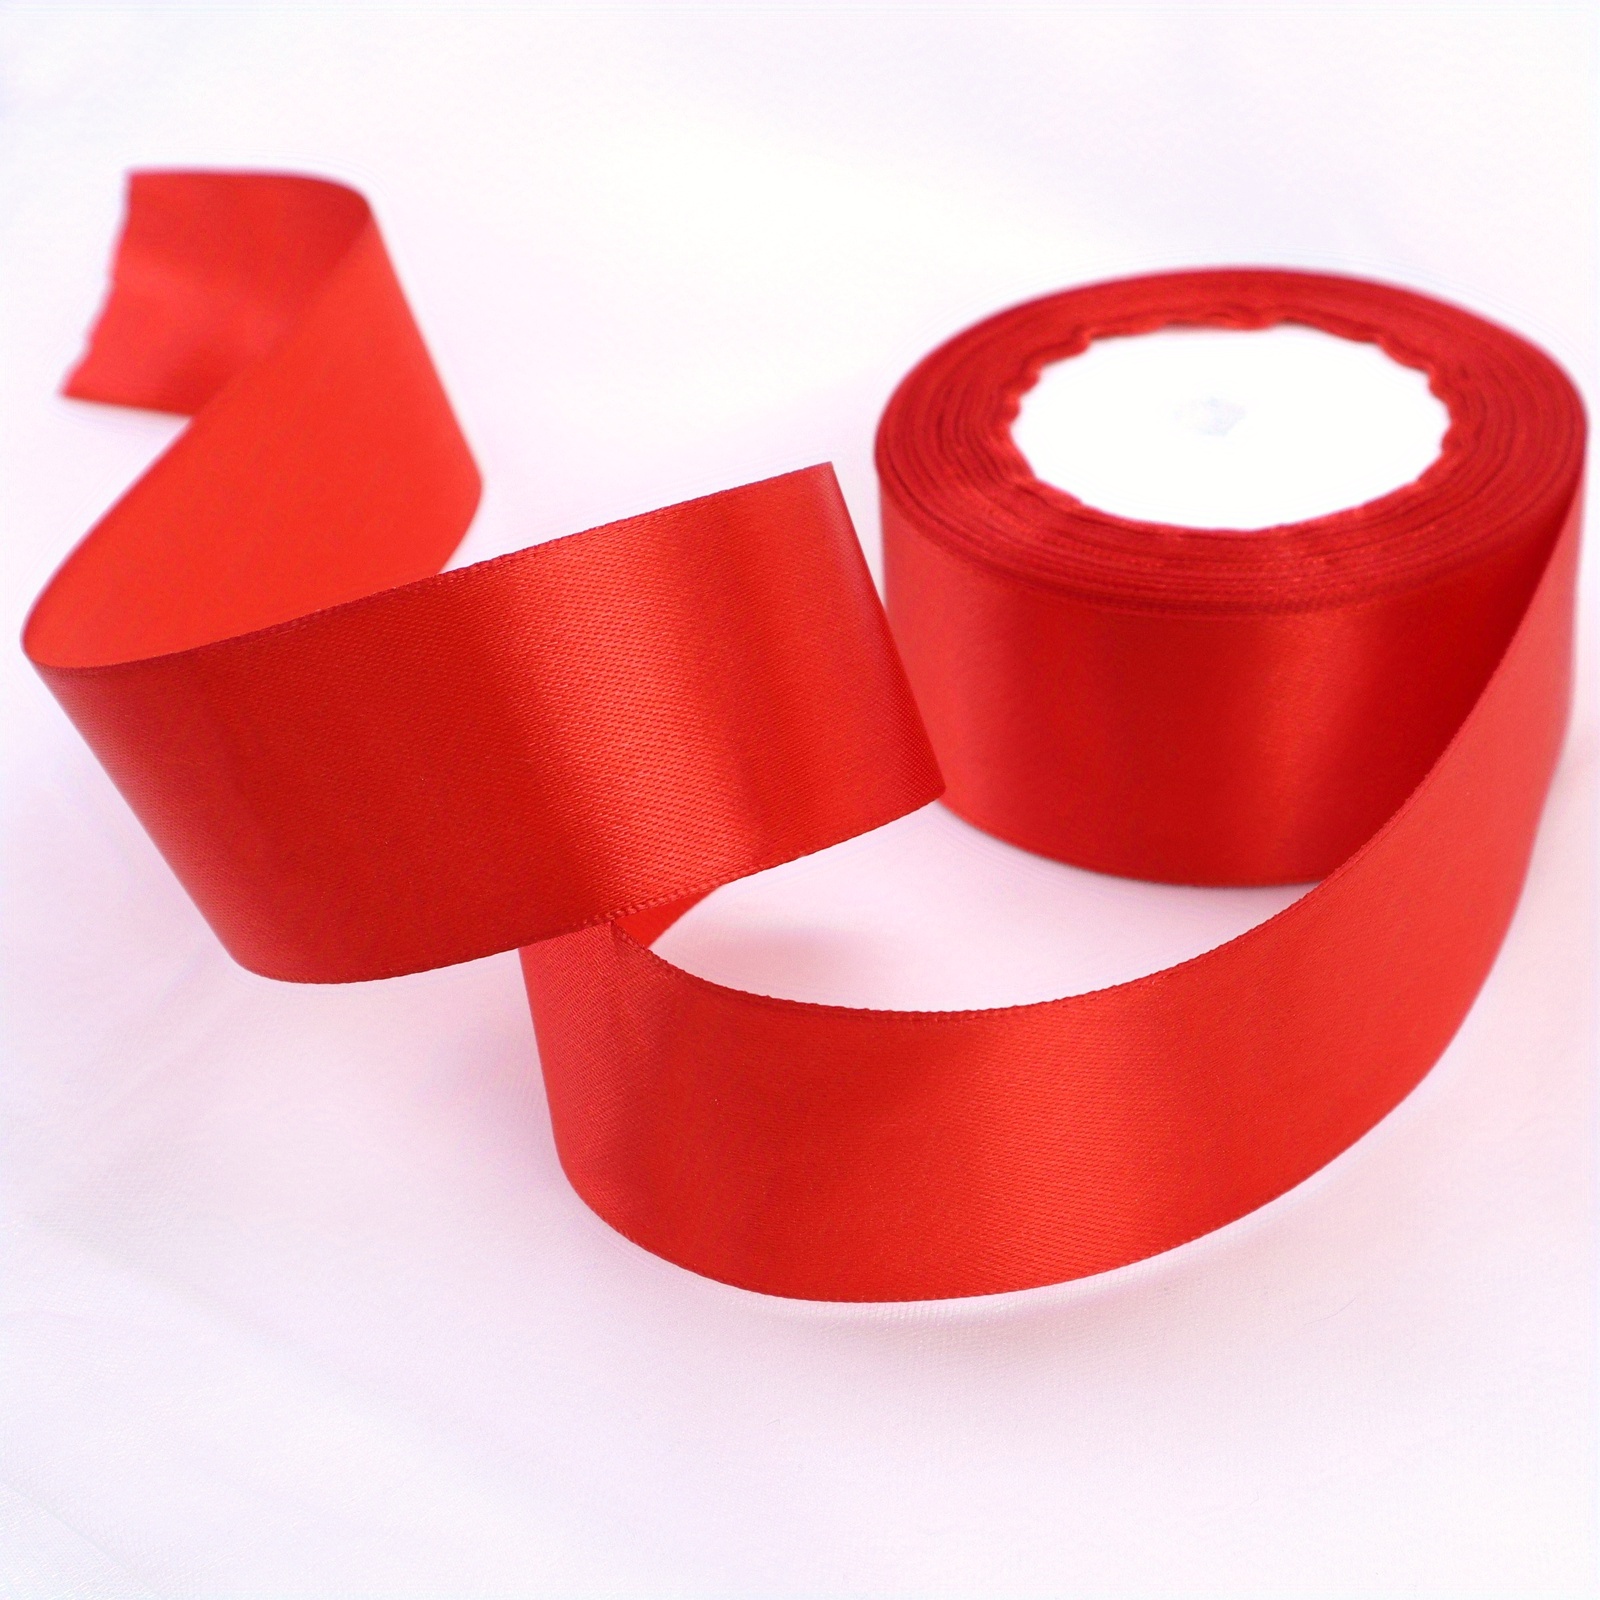 Red Satin Ribbon 3 Inch 25 Yard Roll for Gift Wrapping, Weddings